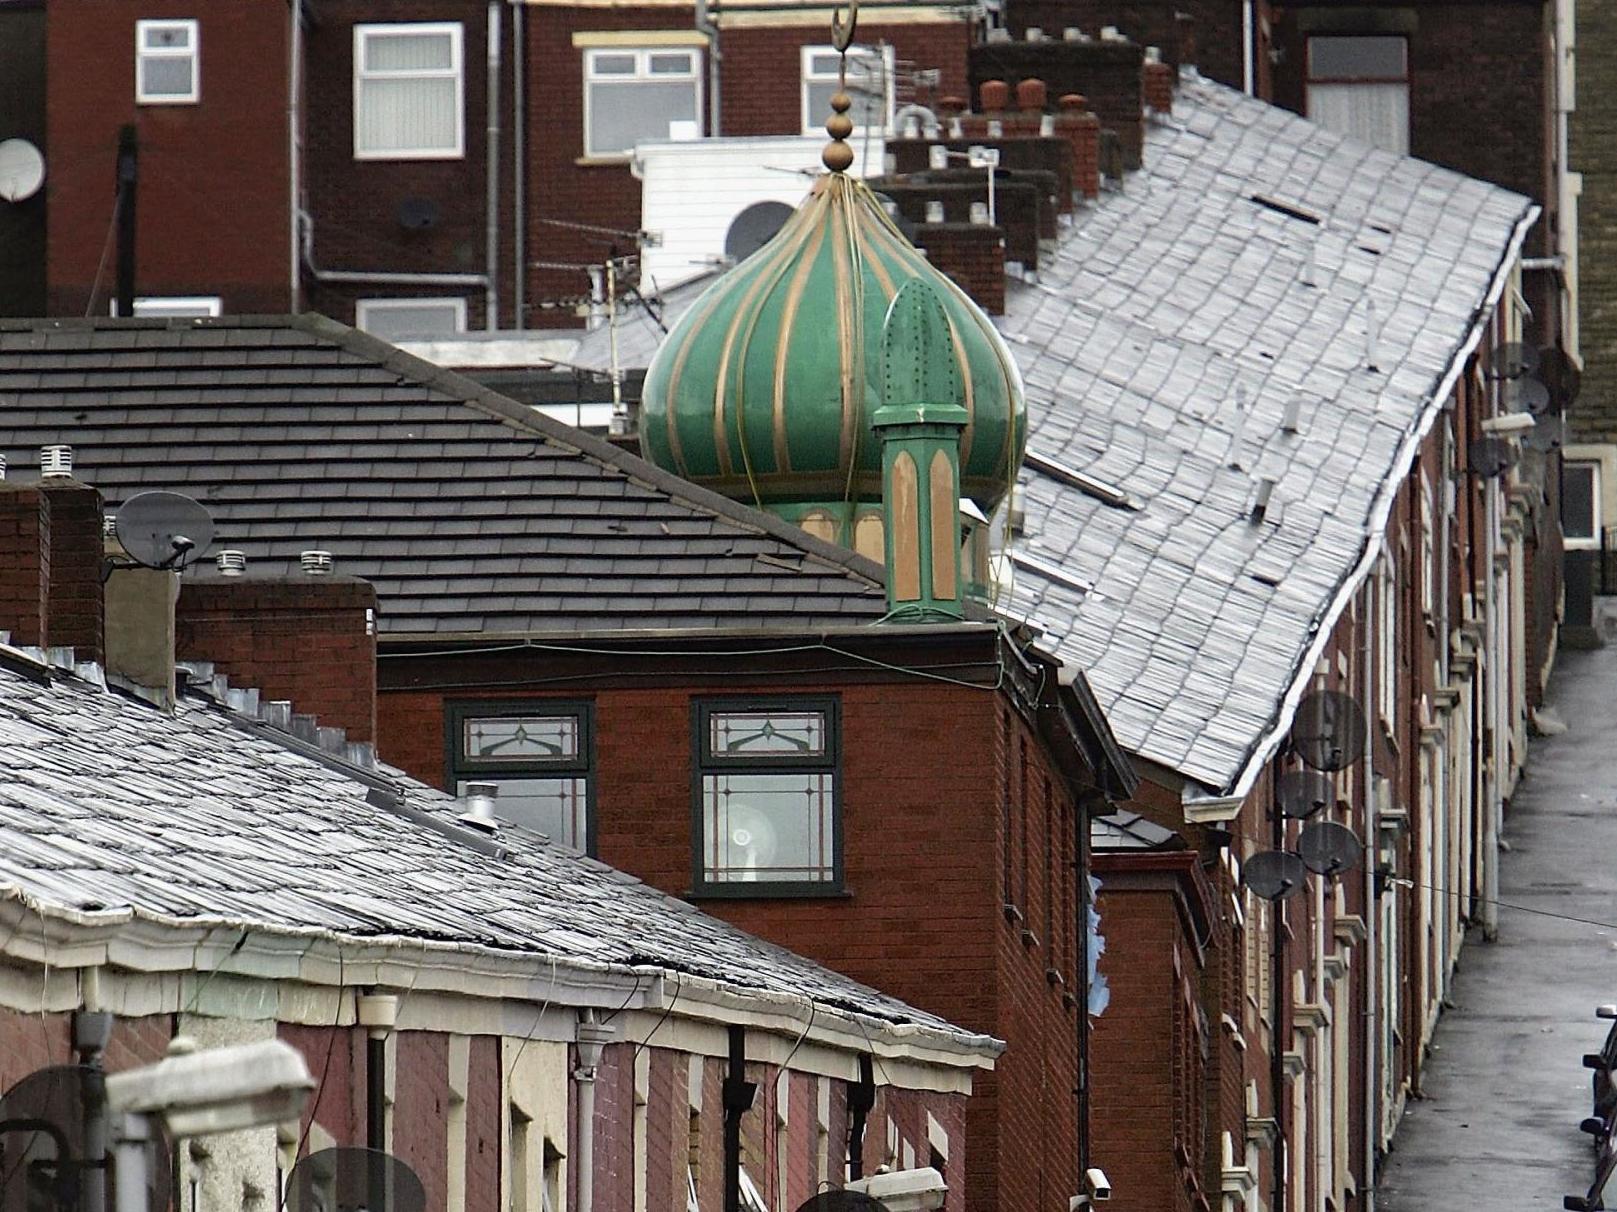 A mosque in Blackburn, one of the areas affected by the rules